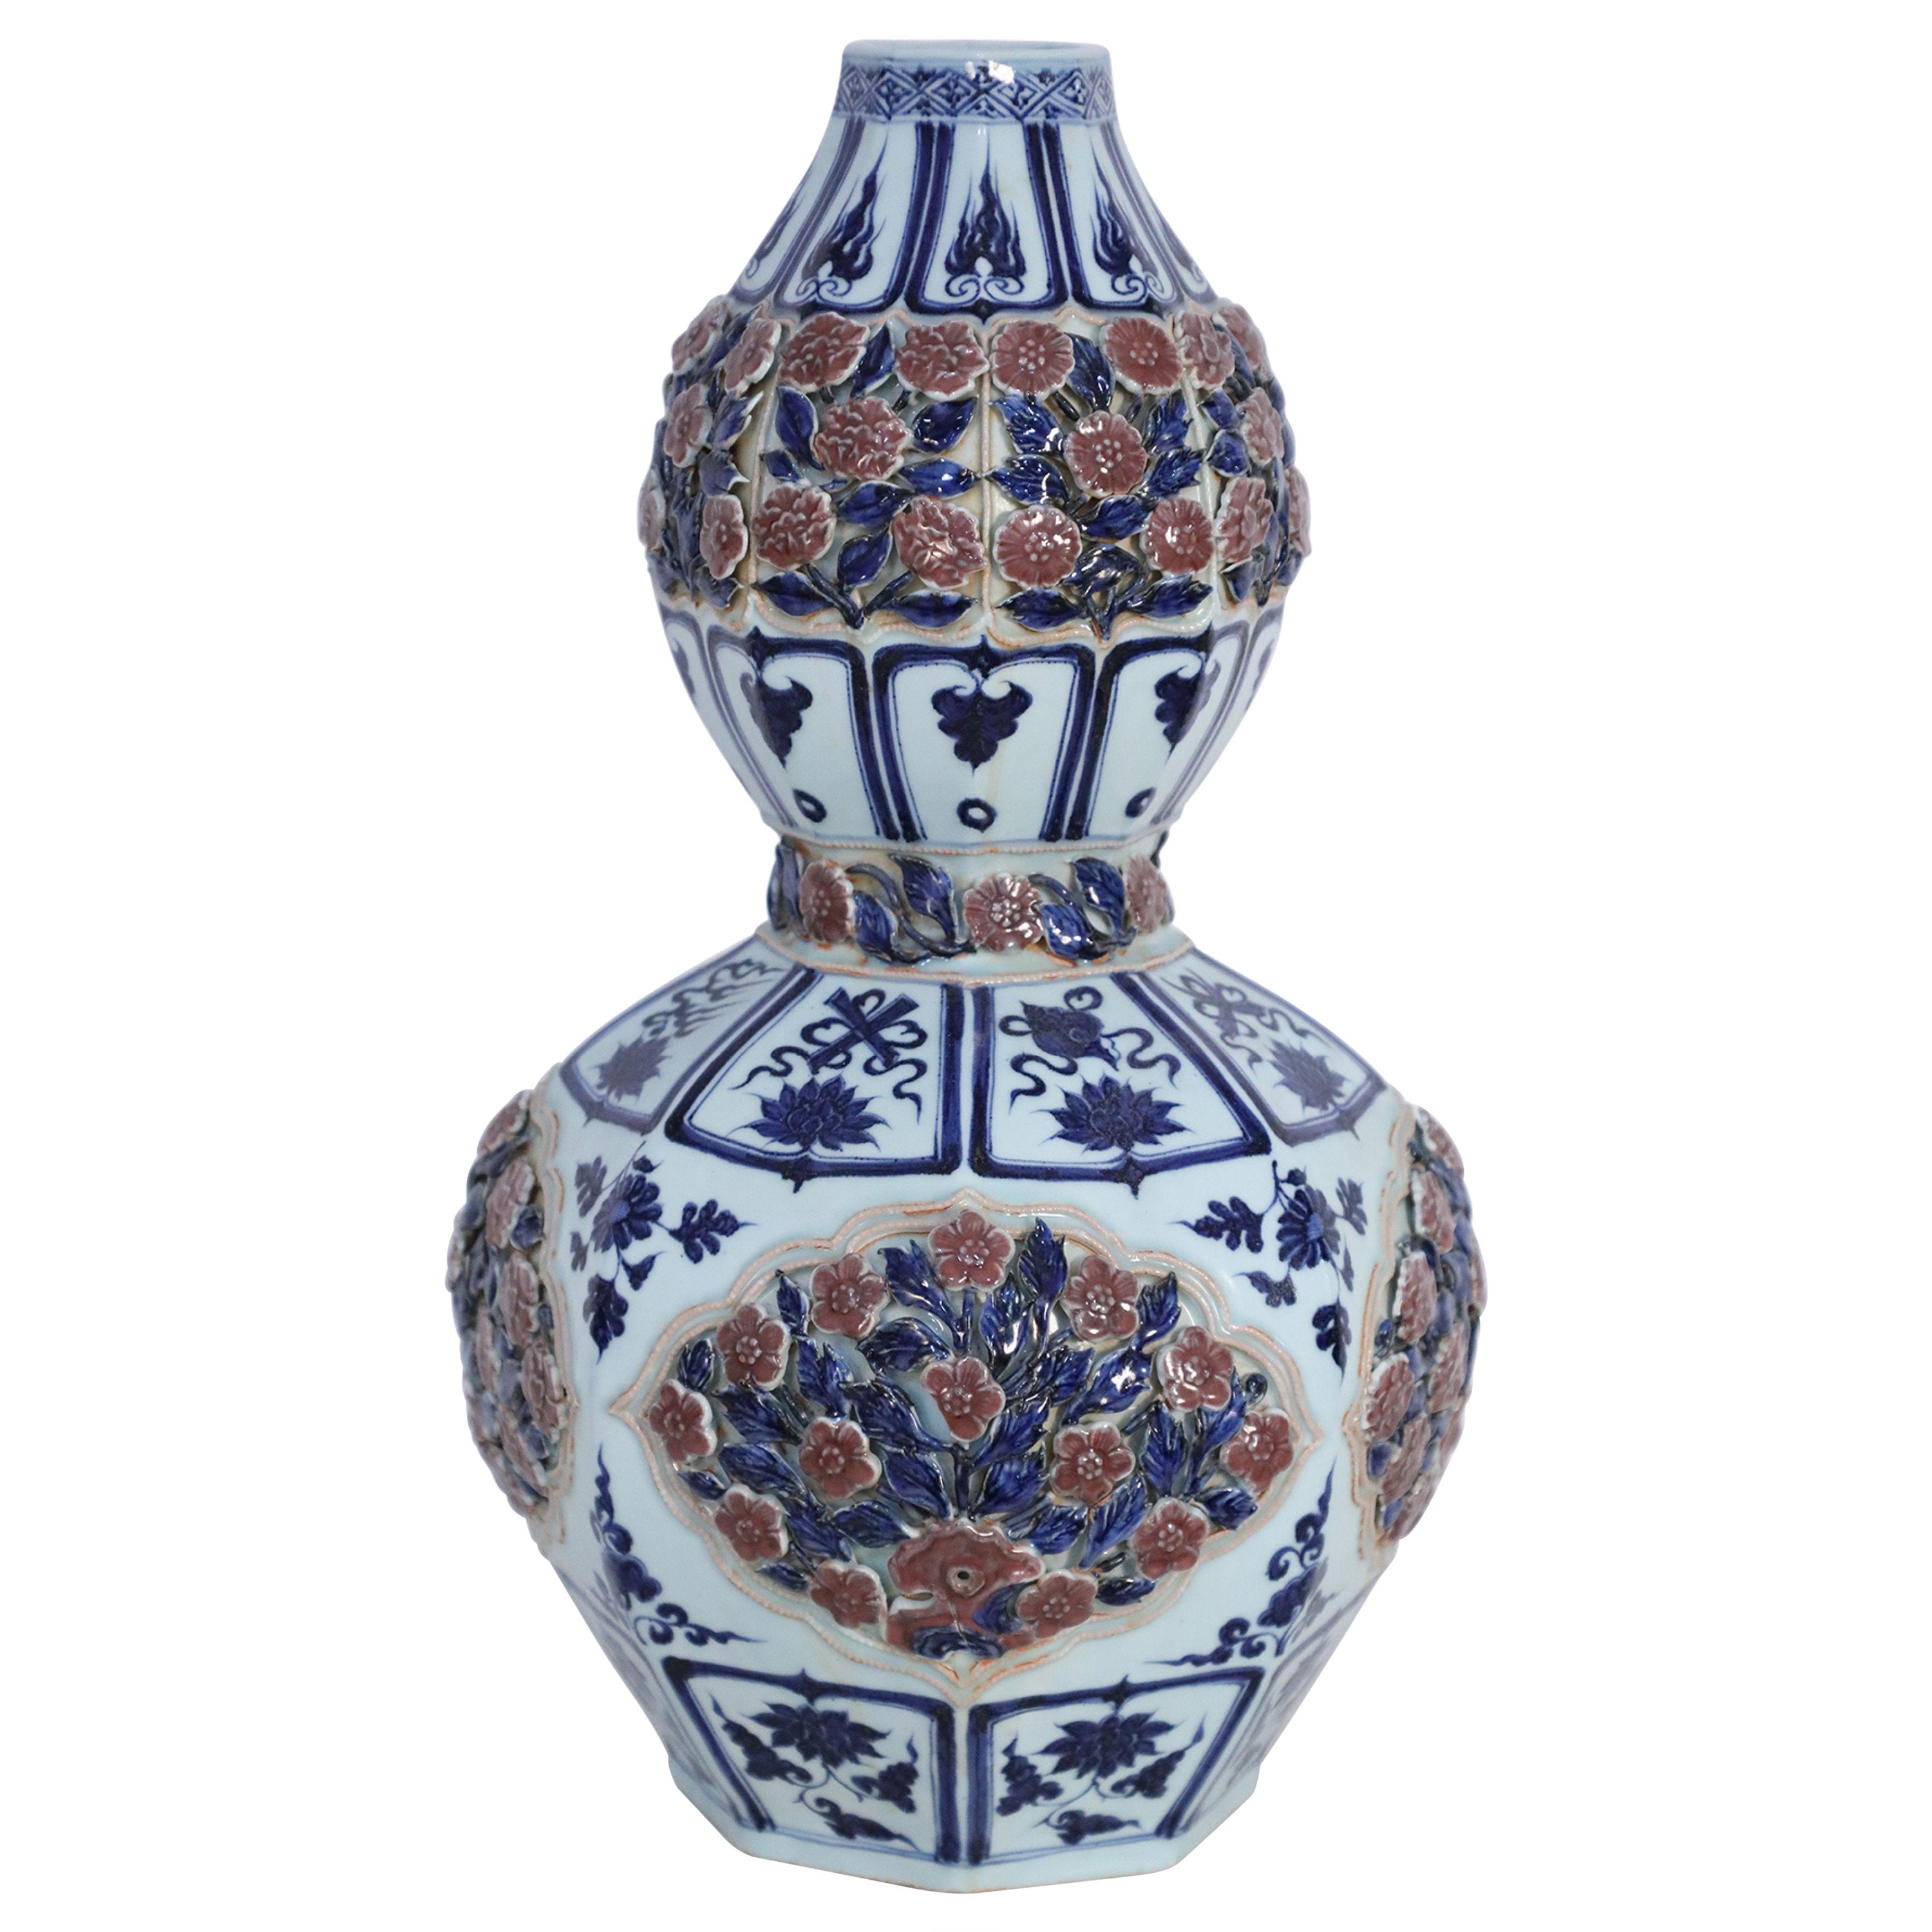 Chinese White and Blue and Raised Rose Design Double Gourd Porcelain Vase